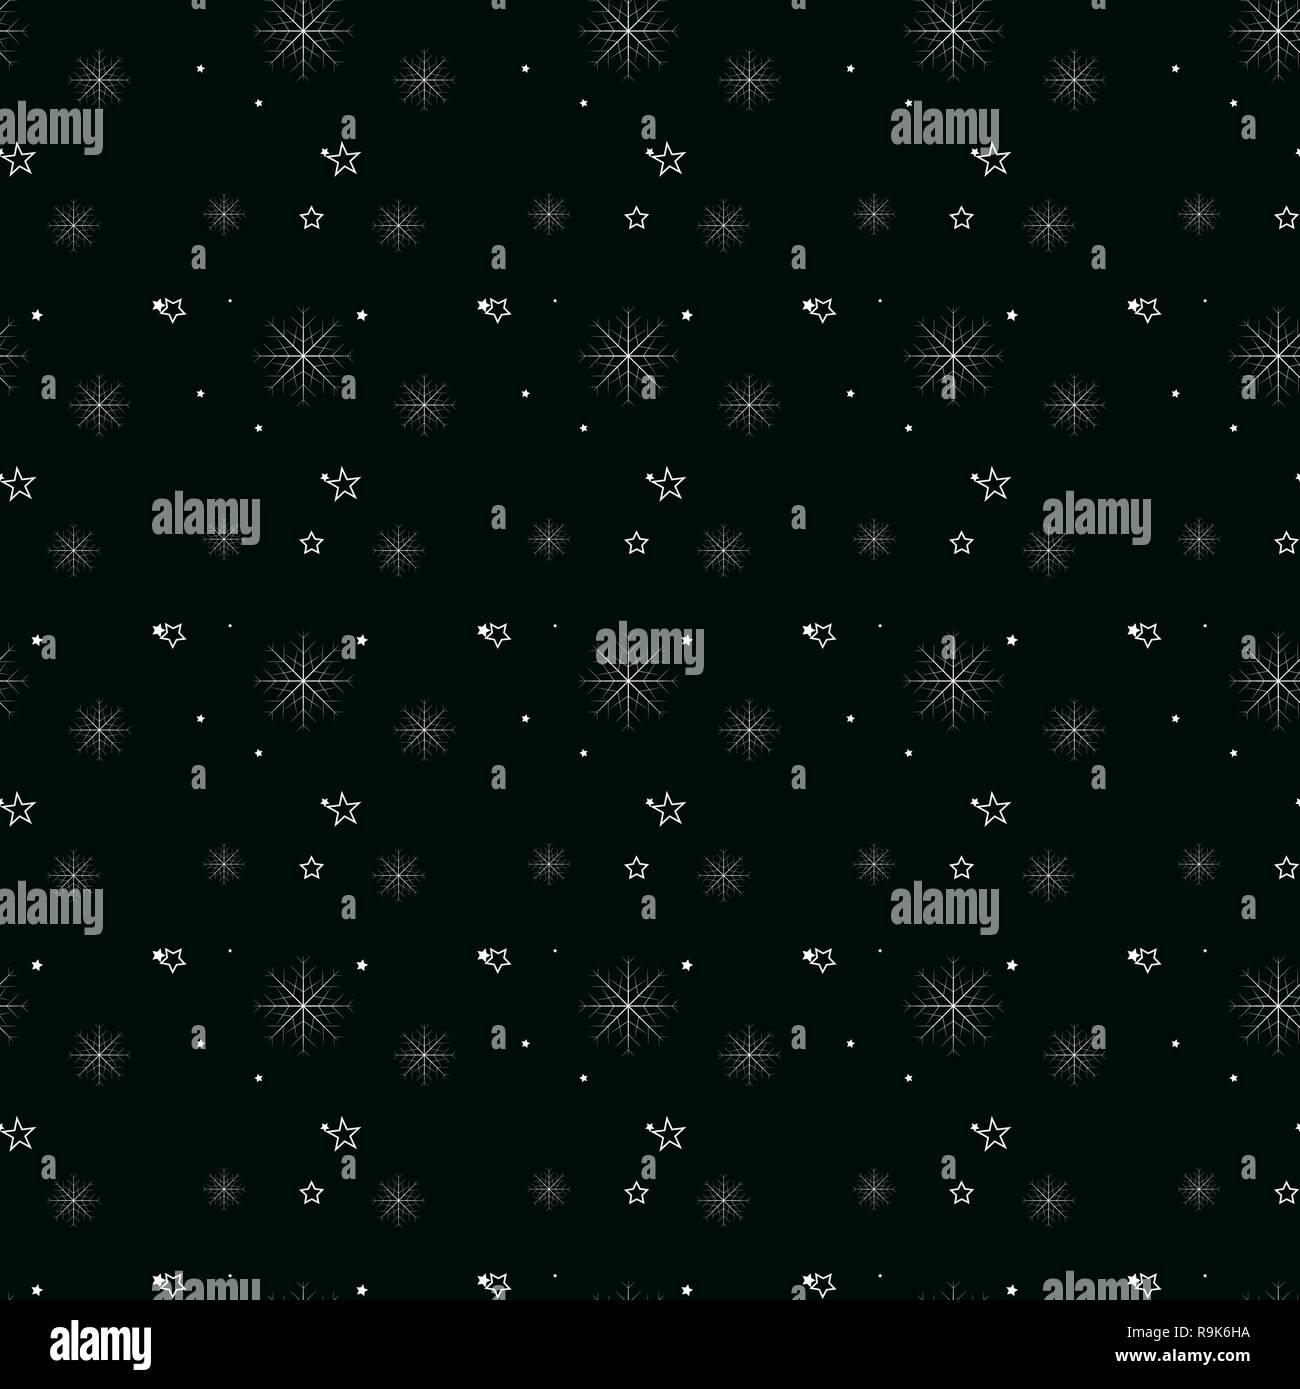 Snowflake simple seamless pattern on black Abstract wallpaper